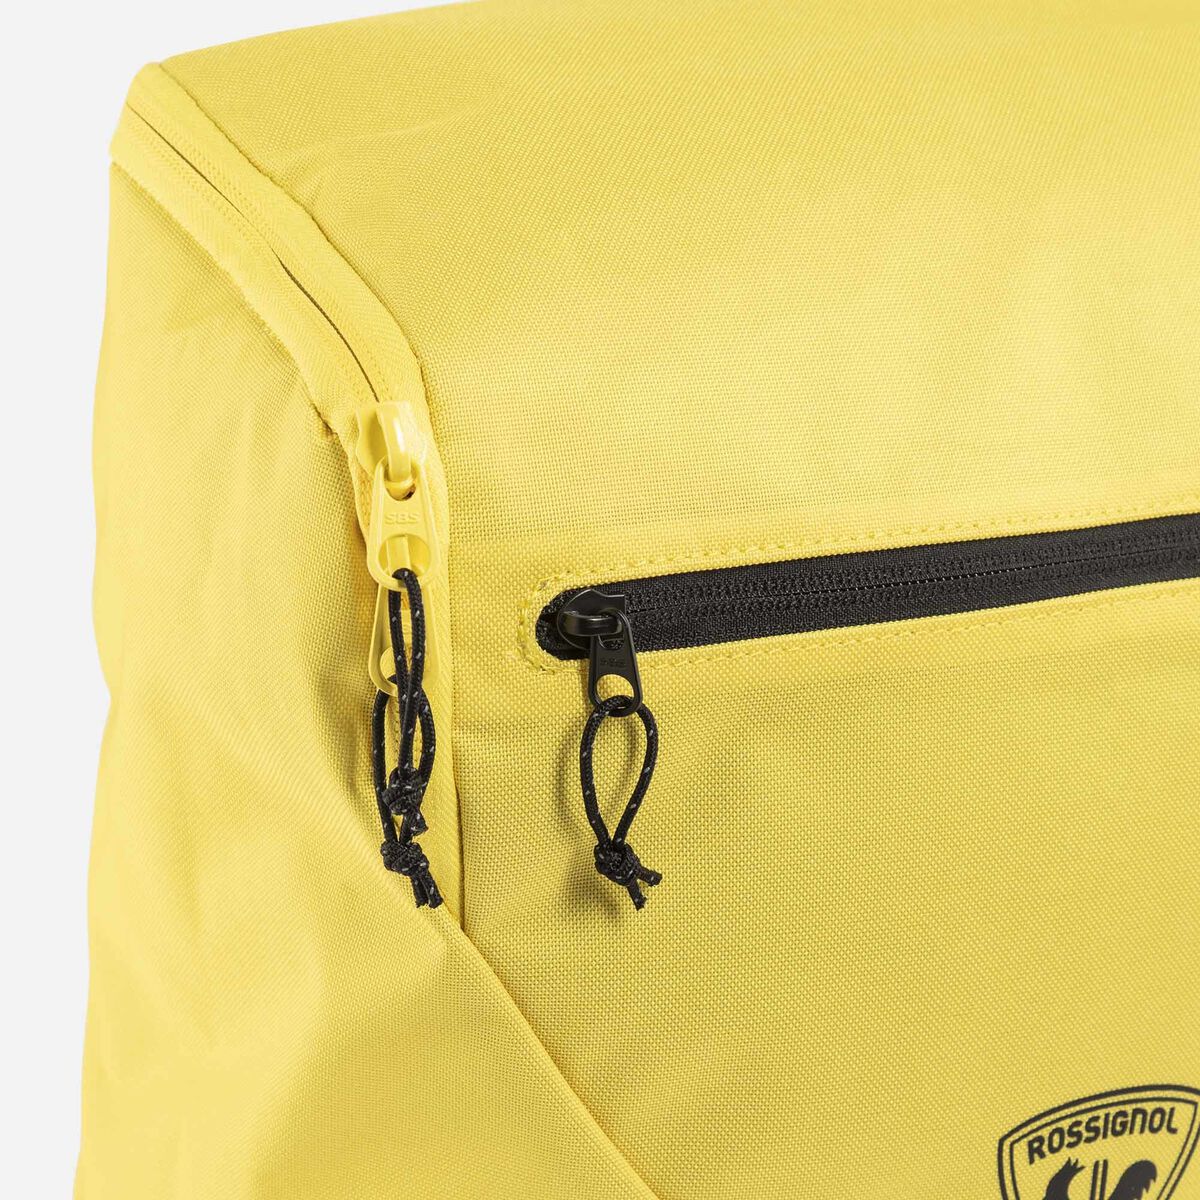 Unisex 20L yellow Commuter backpack